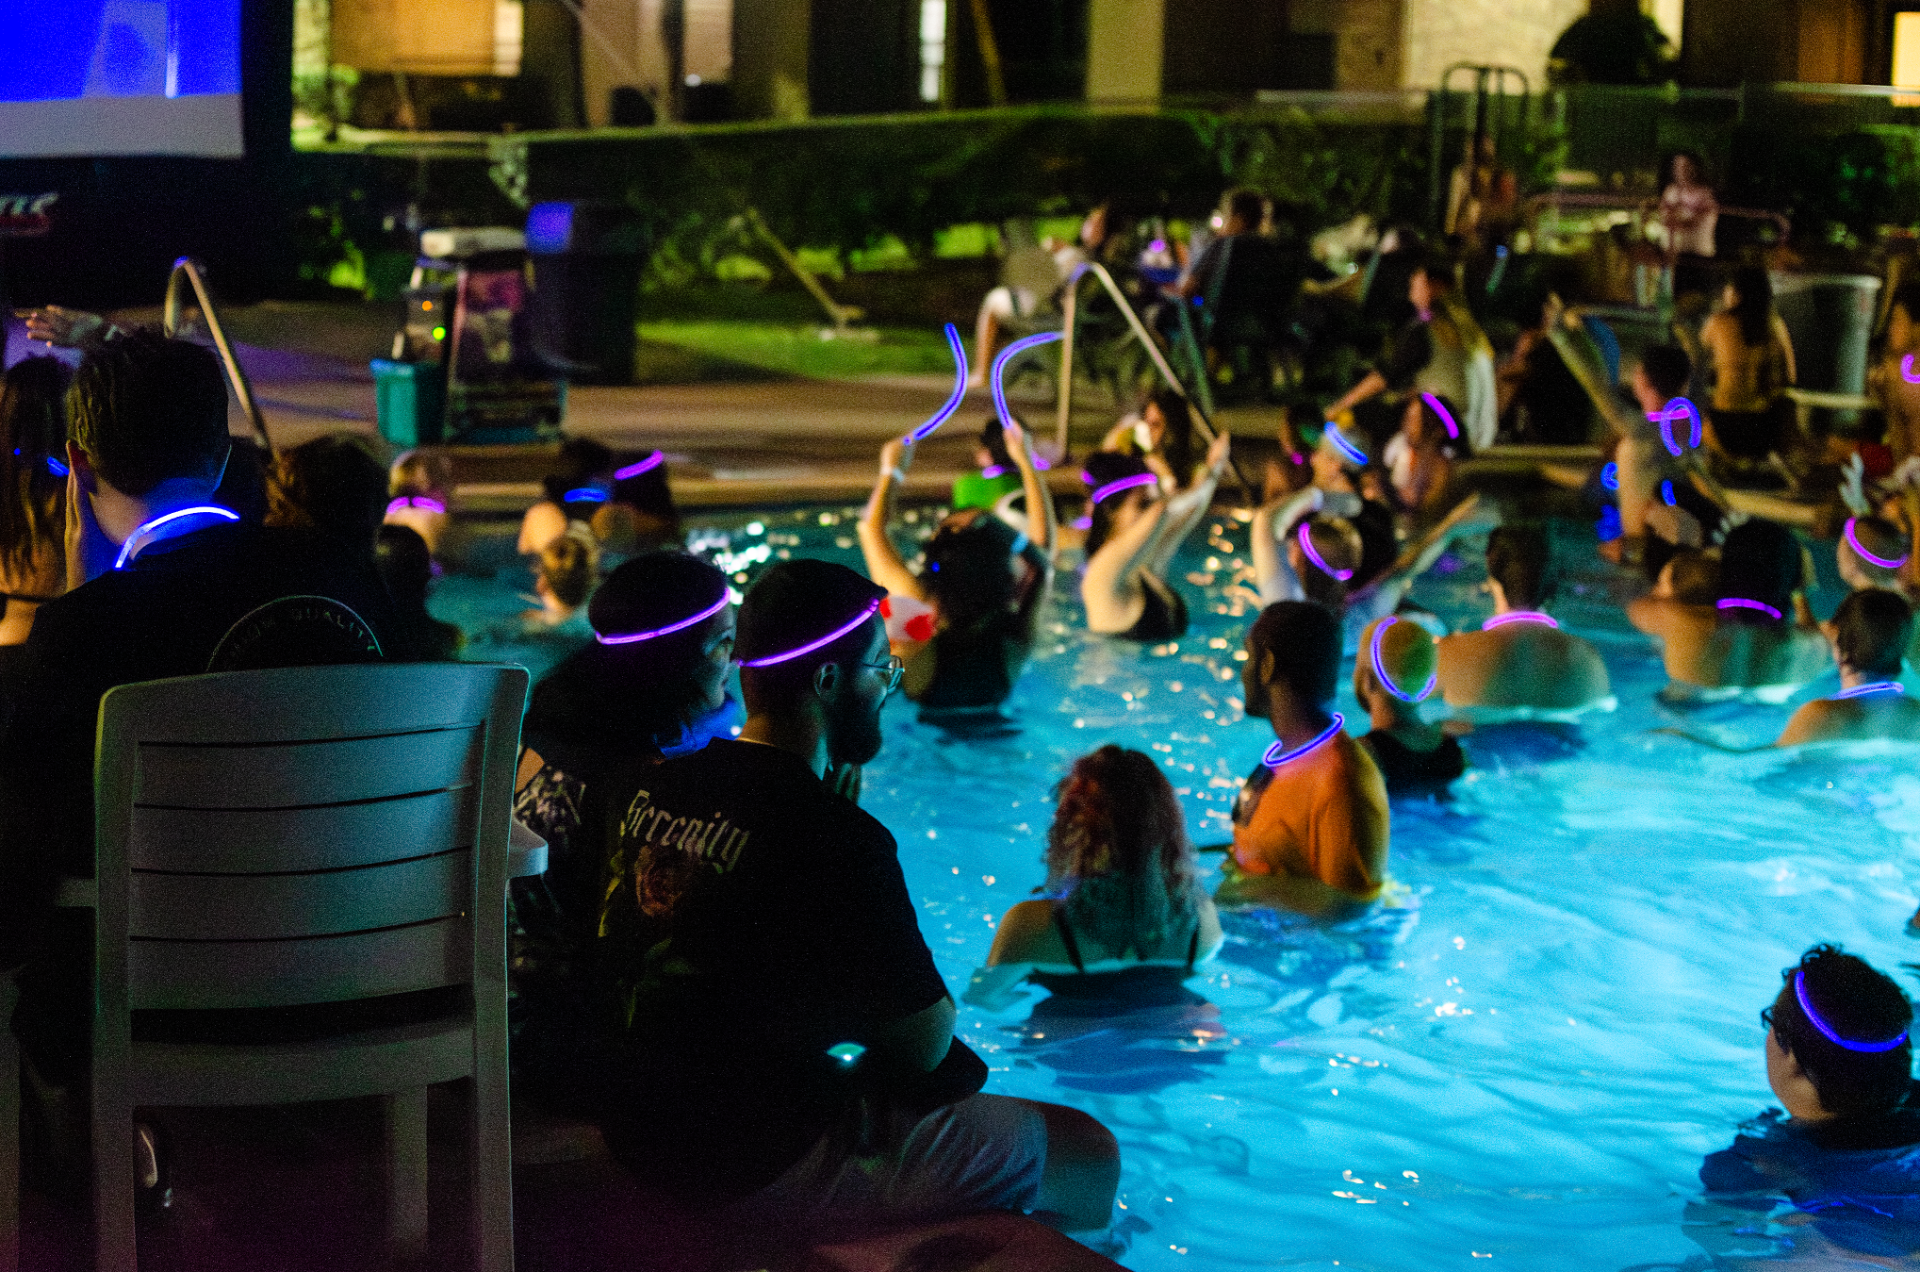 A variety of people, some with glow sticks, lounge in a pool at night.  